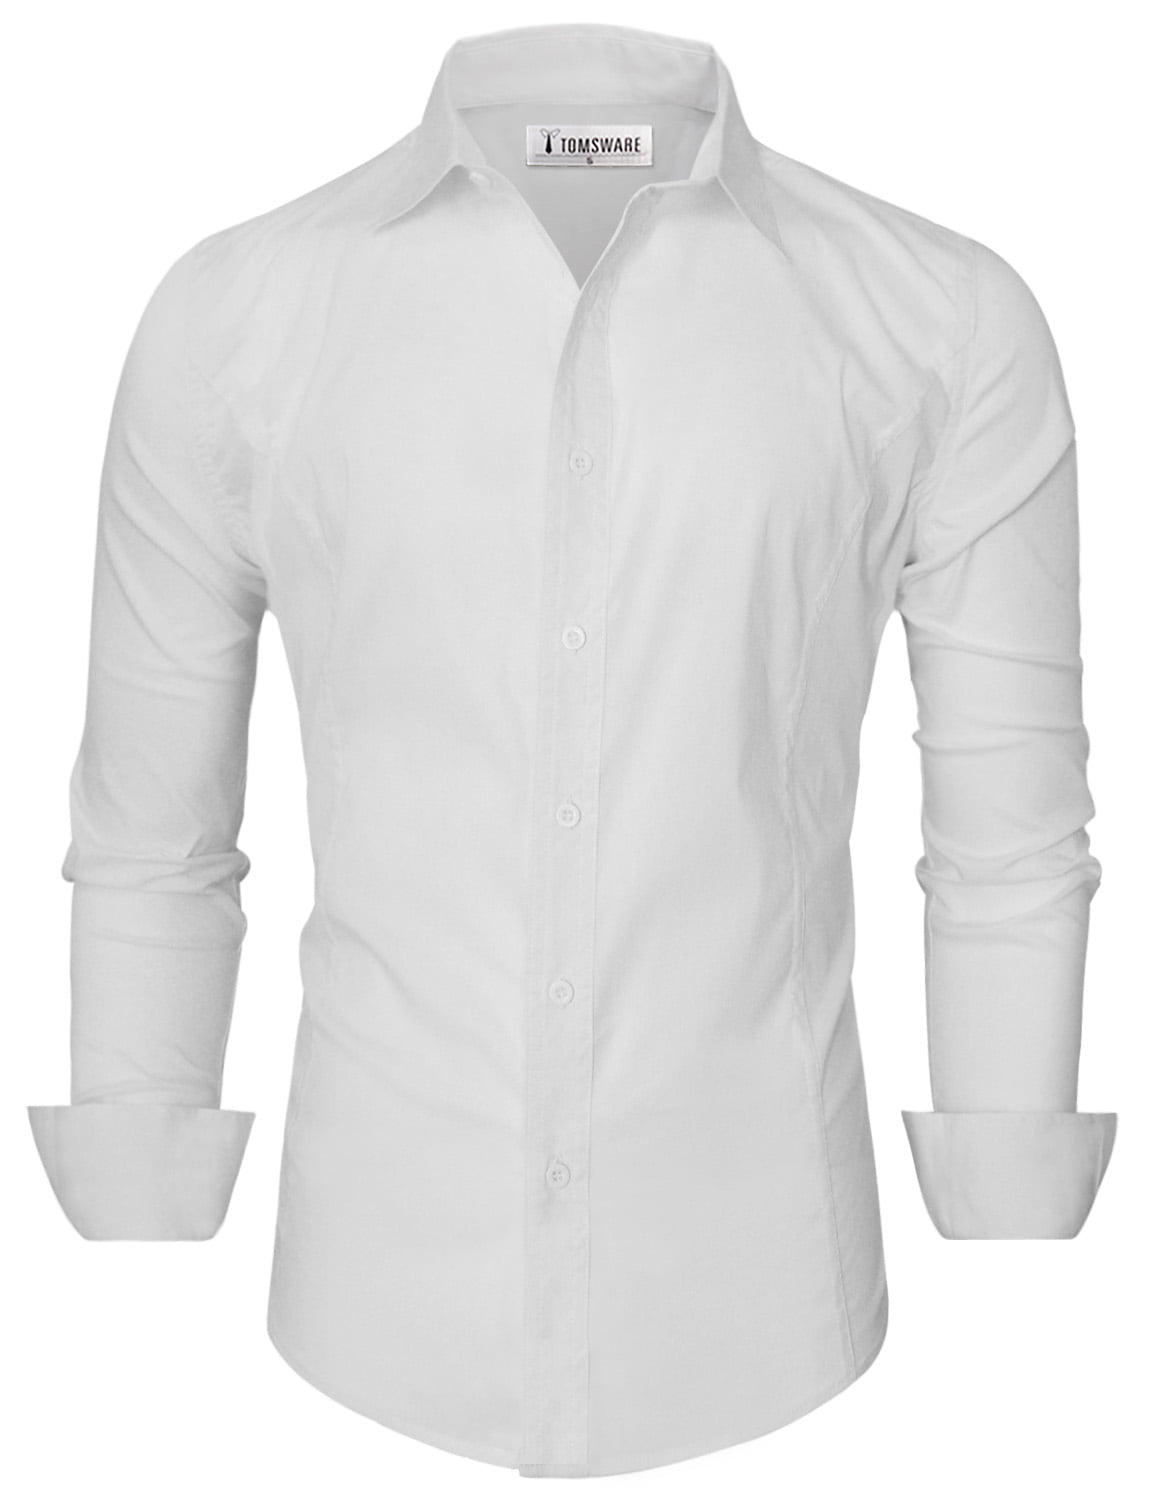 TAM WARE Mens Casual Slim Fit Short Sleeve Winkle Free Button Down Shirt